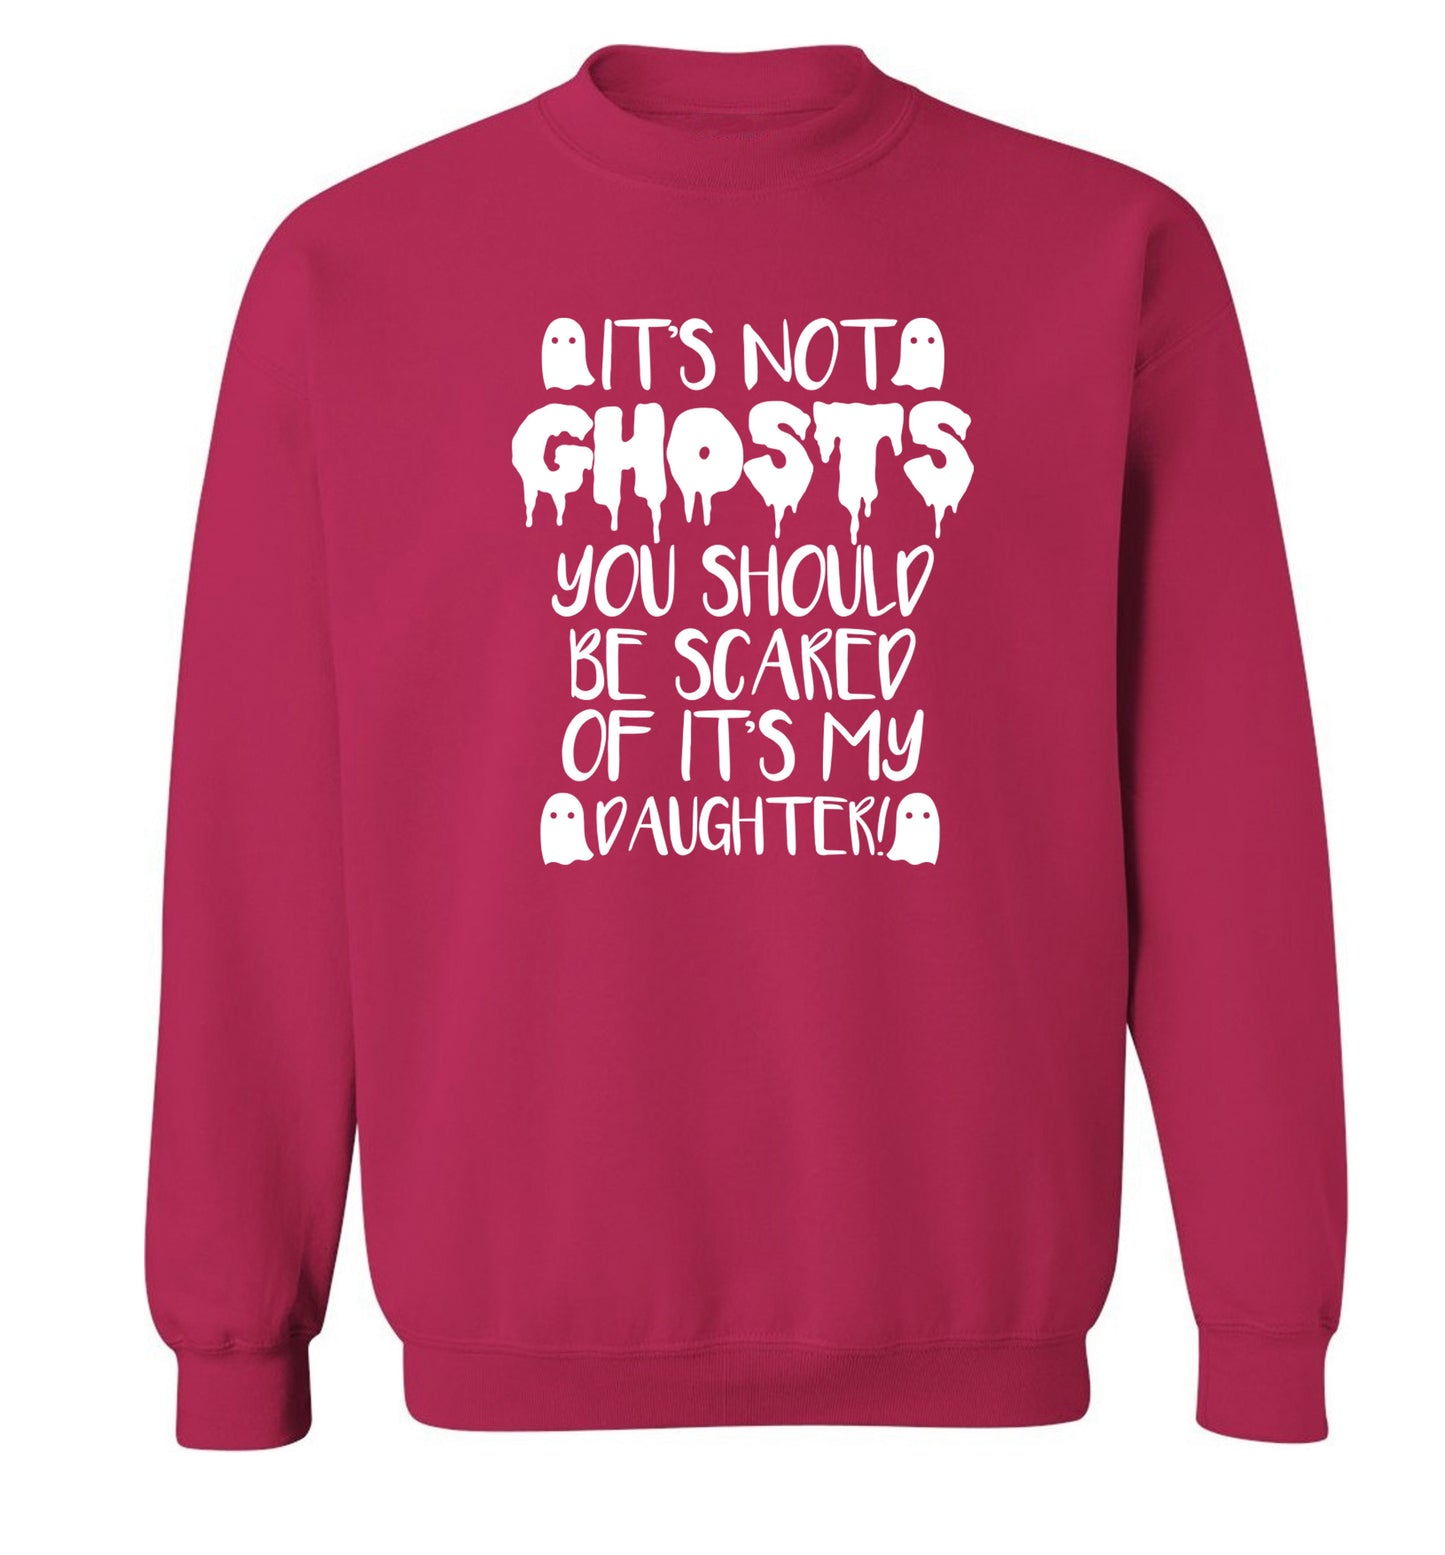 It's not ghosts you should be scared of it's my daughter! Adult's unisex pink Sweater 2XL